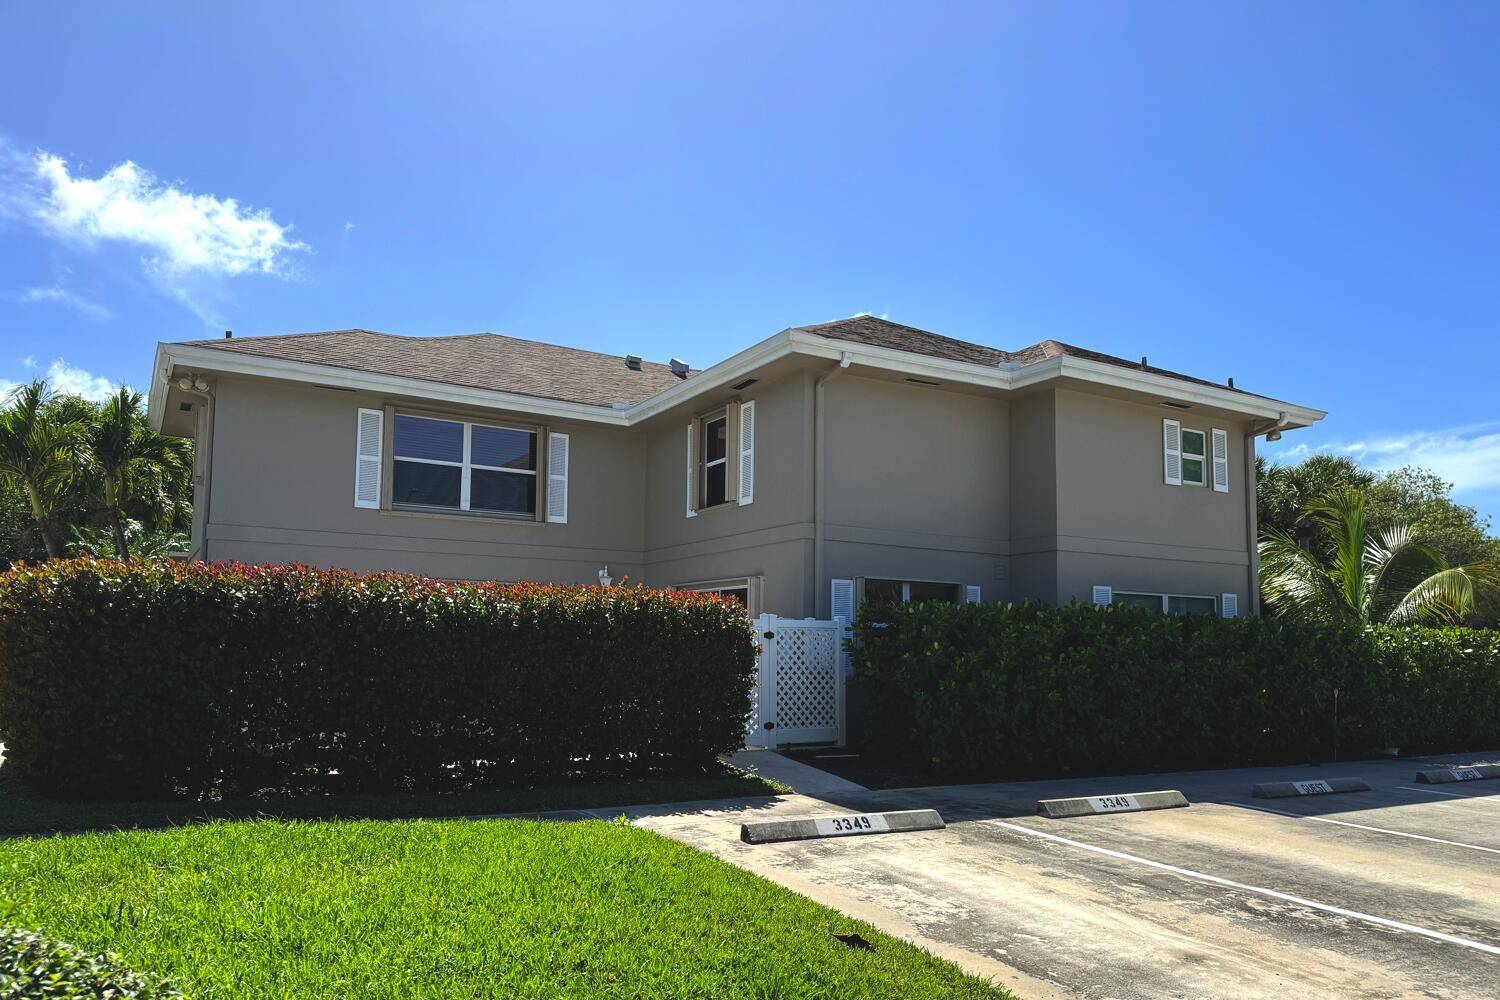 This lovely townhouse in Sunset Trace, Palm City features two bedrooms and 2.